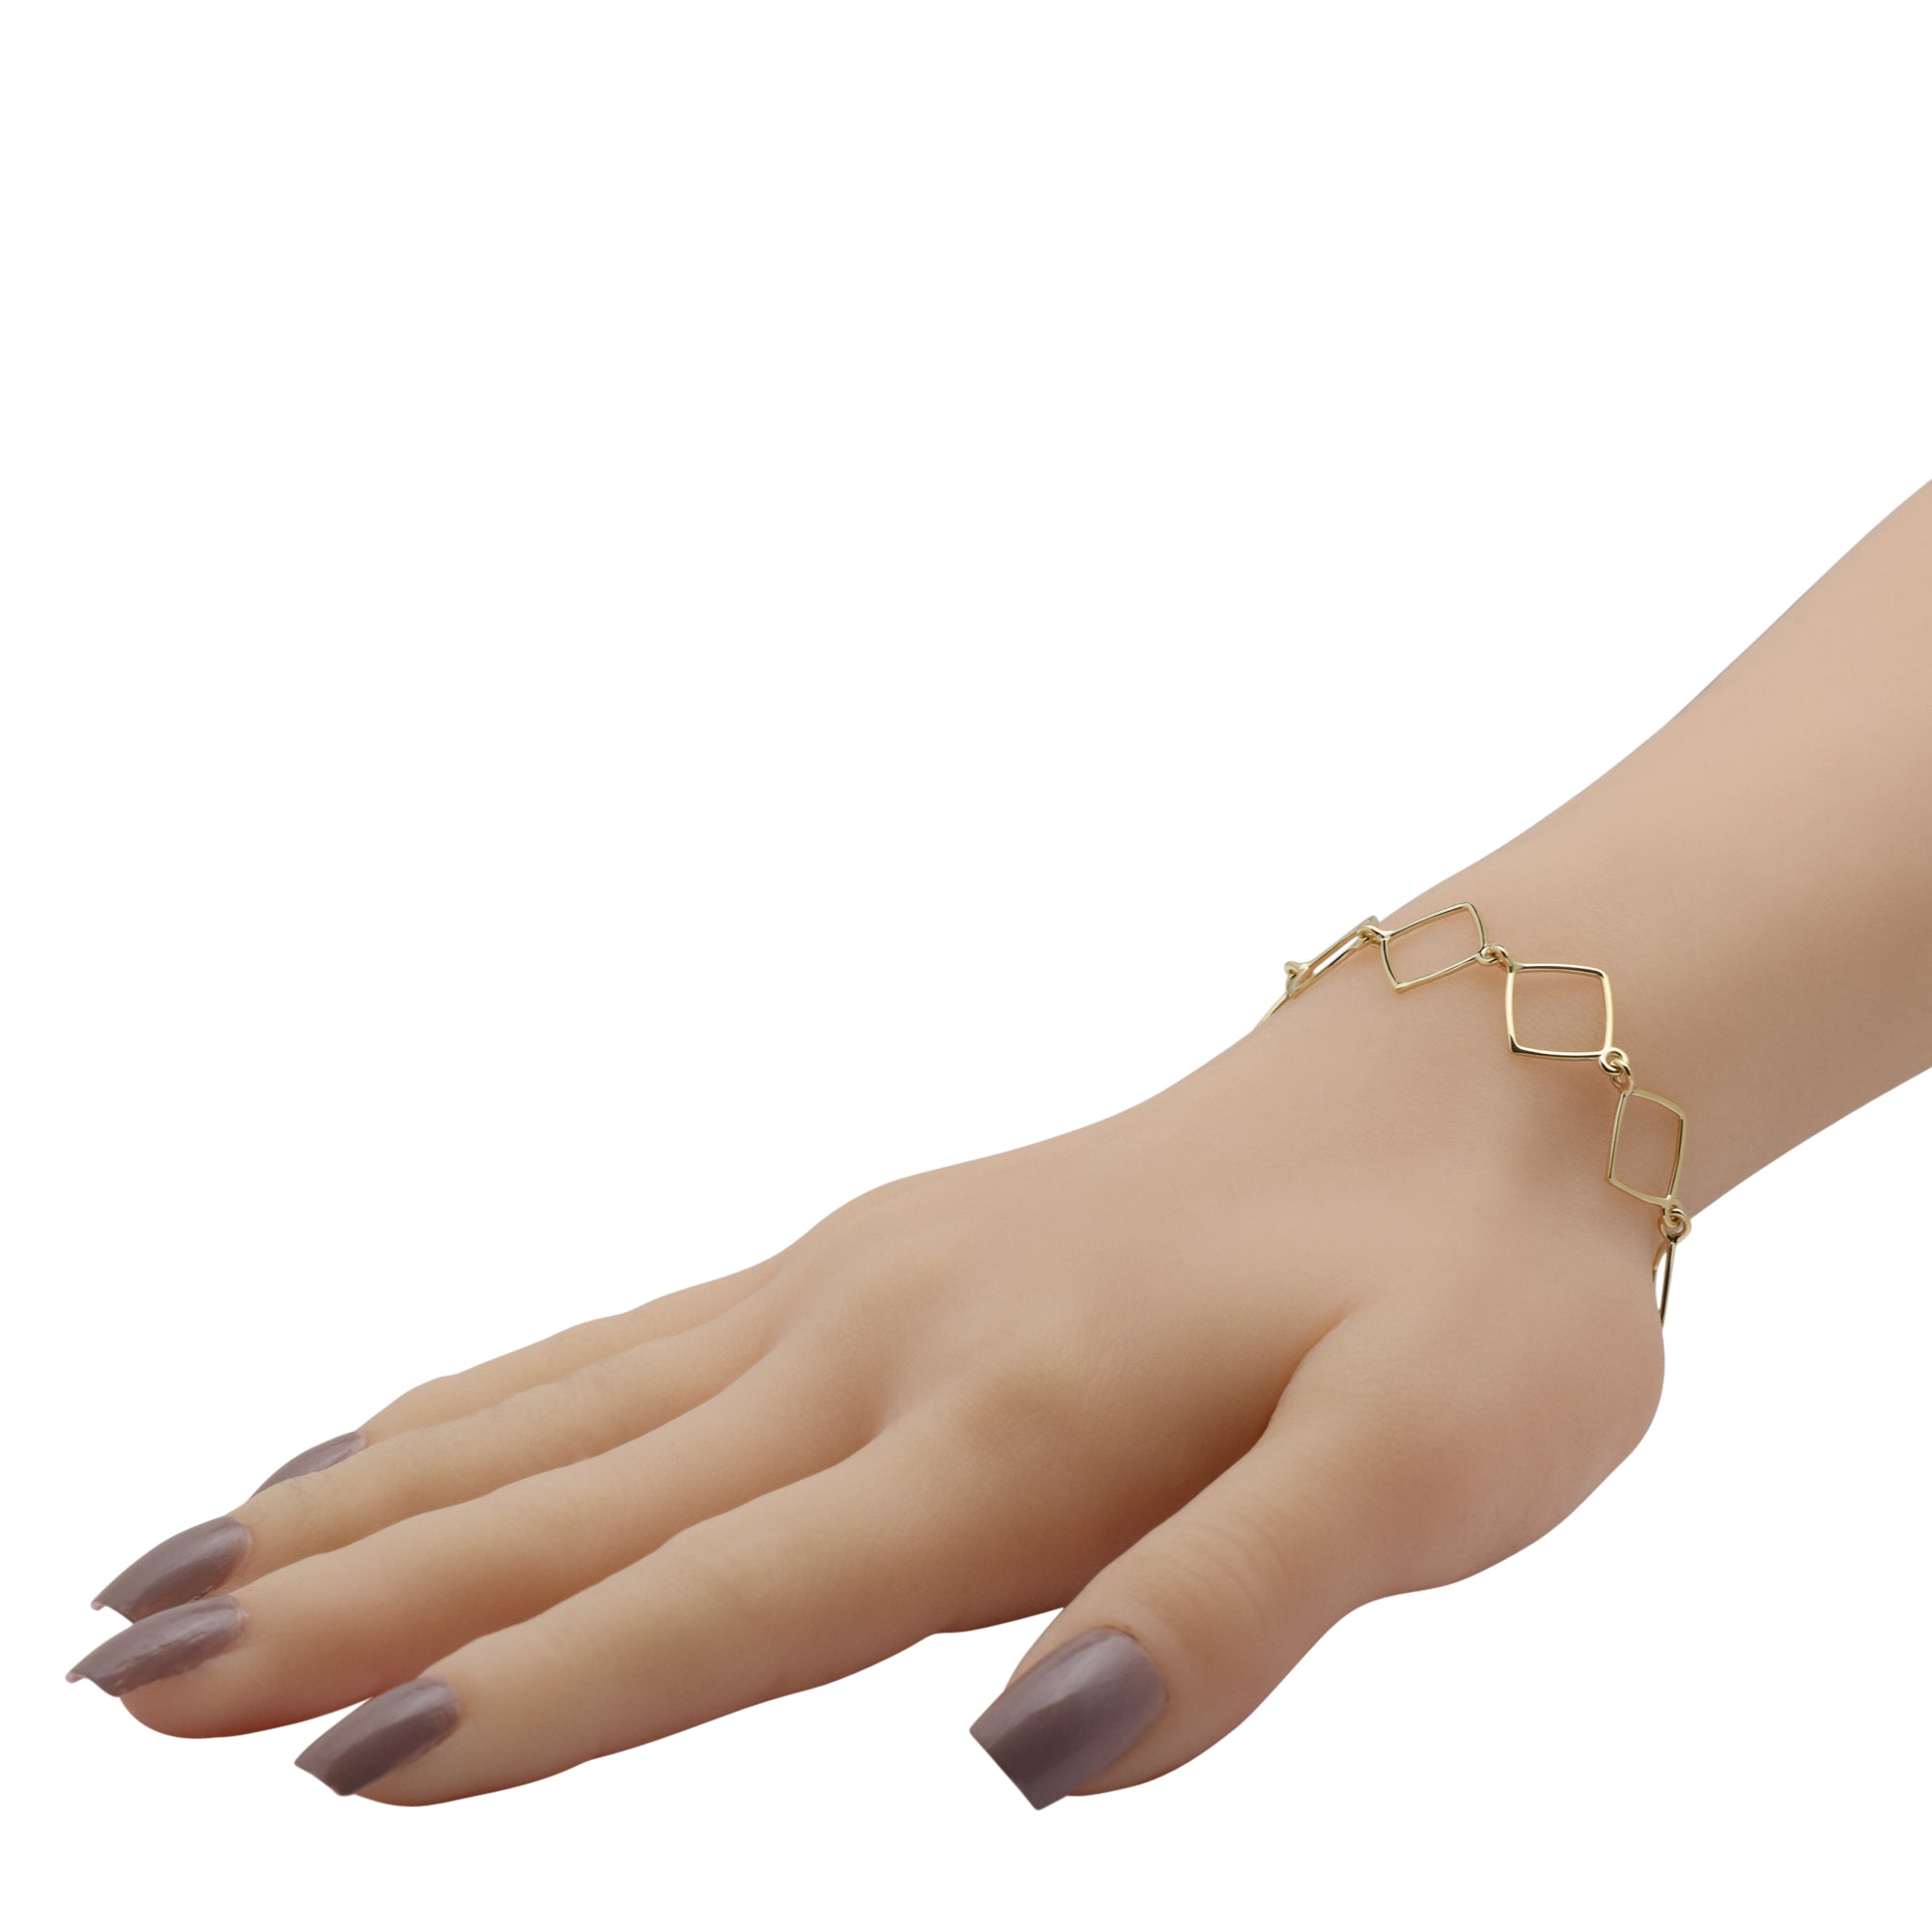 Square Link Bracelet in 14kt Yellow Gold